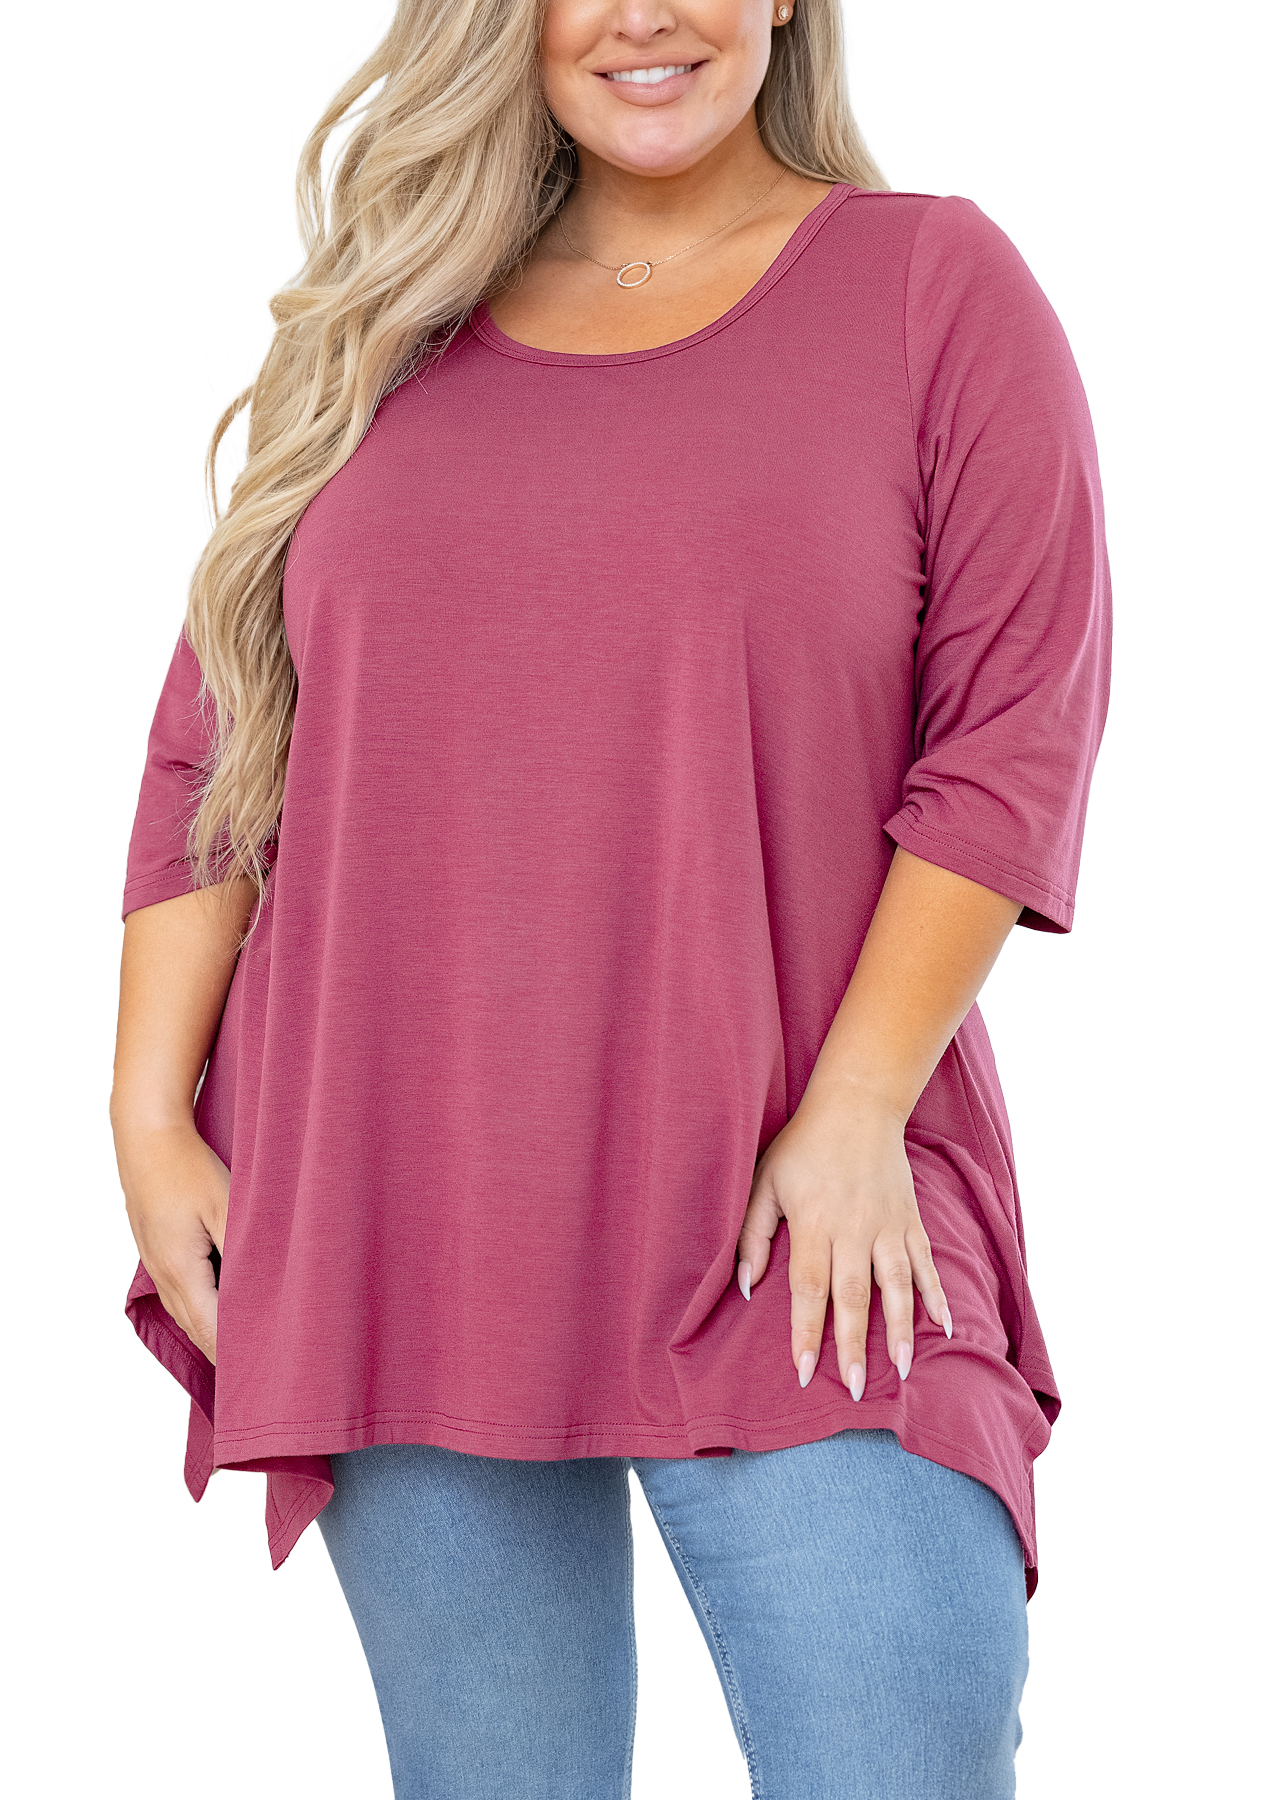 SHOWMALL Plus Size Women Top 3/4 Sleeve Clothes Purple Red 5X Blouse Swing Tunic Crewneck Loose Clothing Shirt for Leggings - image 1 of 7